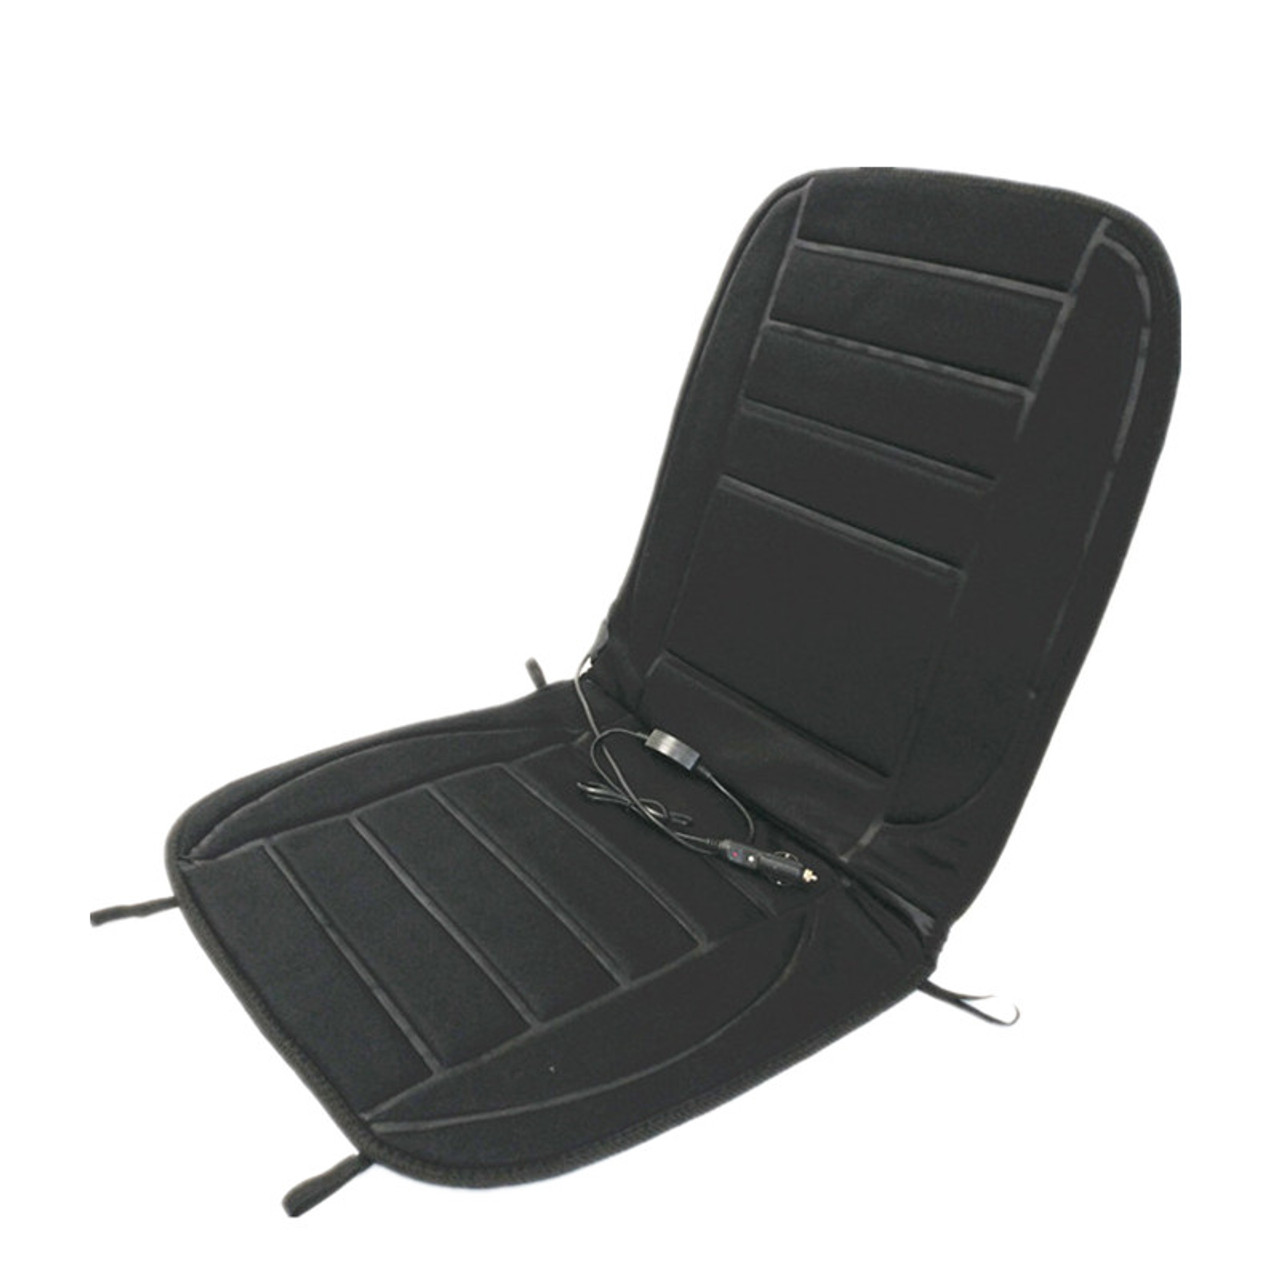 The Best Heated Seat Covers Keep You Toasty